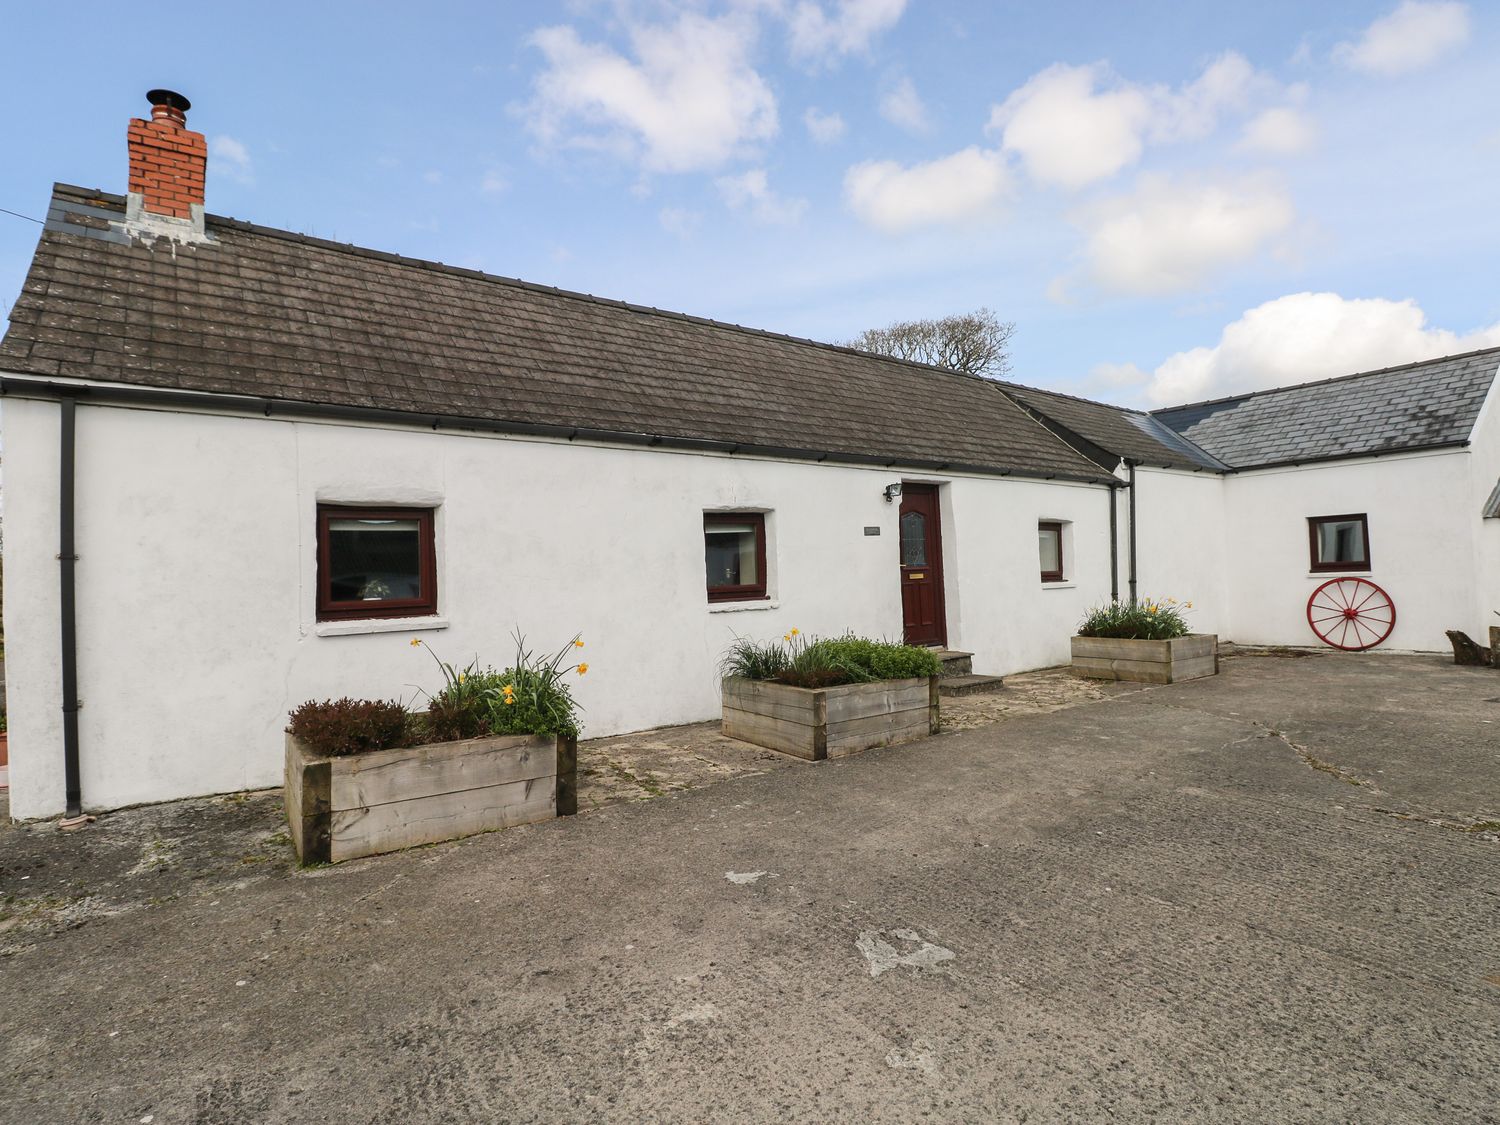 Hill Top Farm Cottage - South Wales - 924622 - photo 1